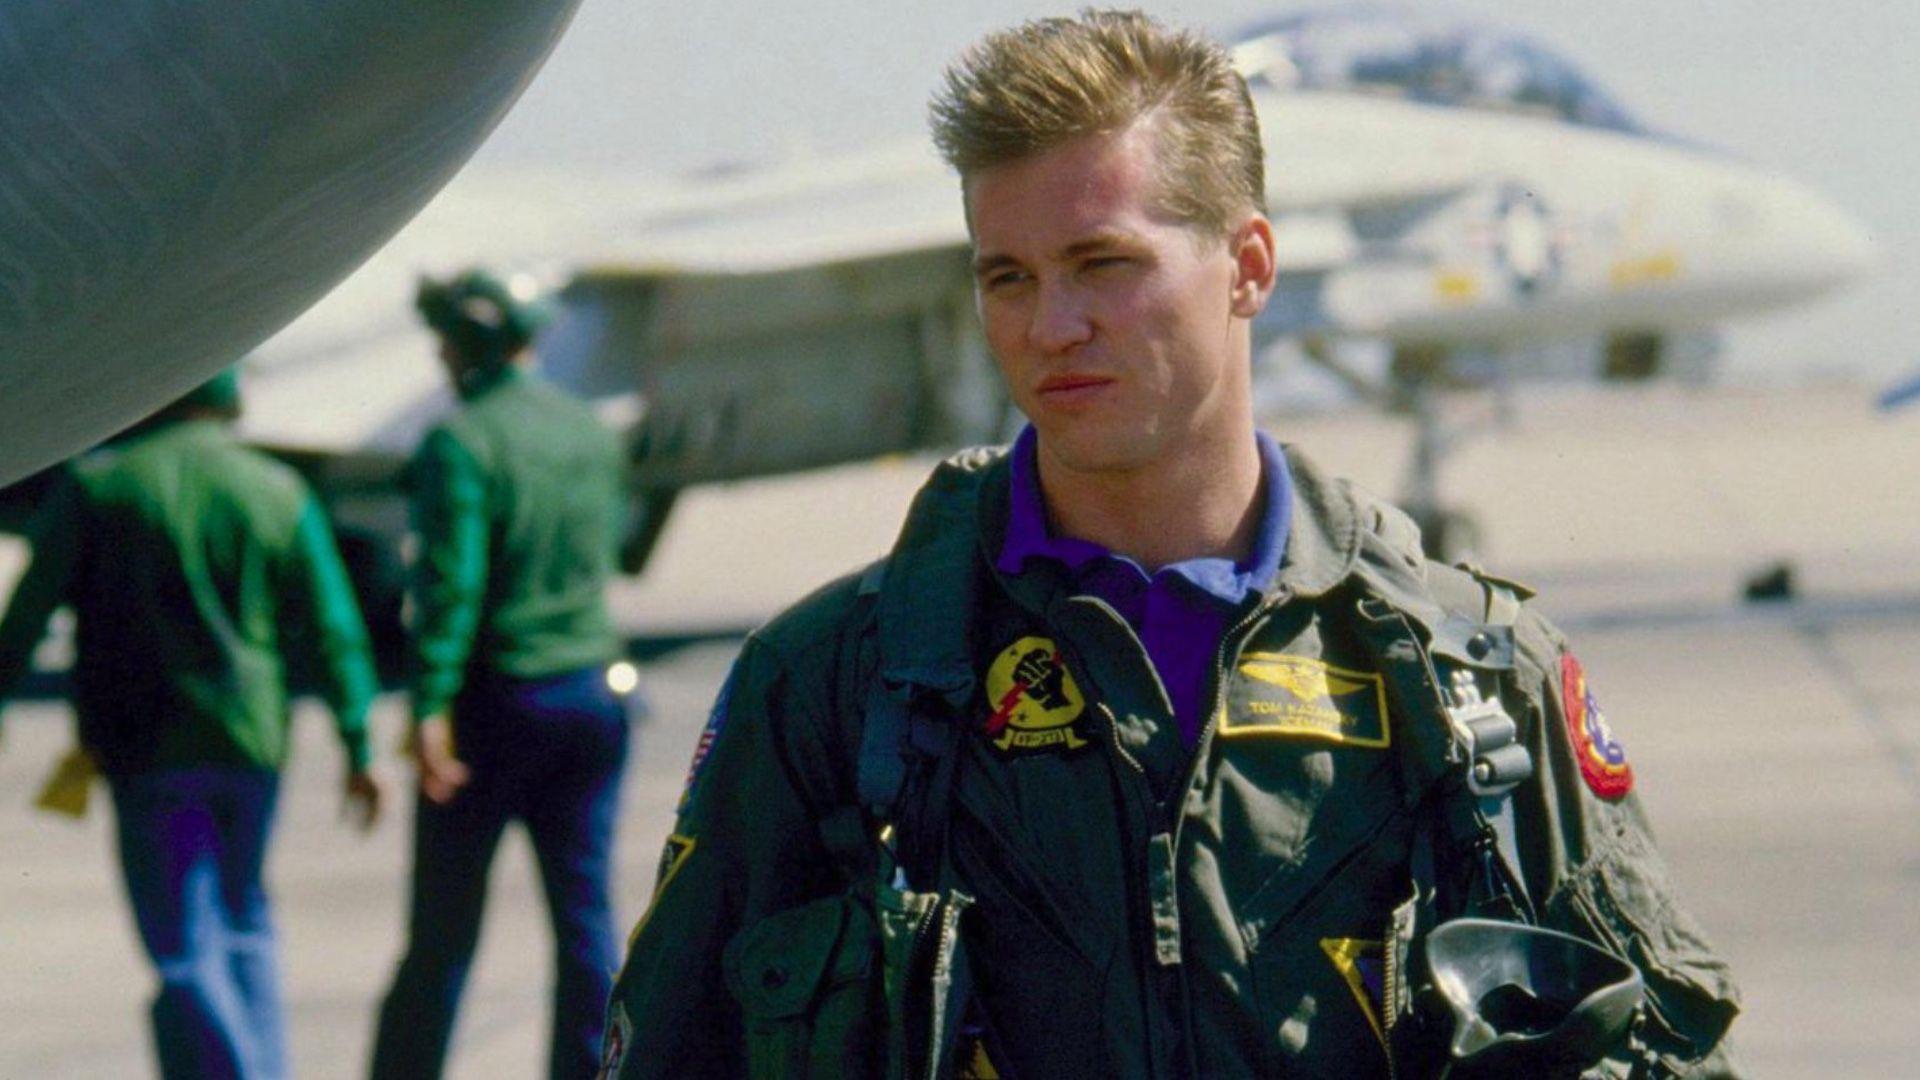 Val Kilmer Confirmed To Be Coming Back as Iceman in TOP GUN